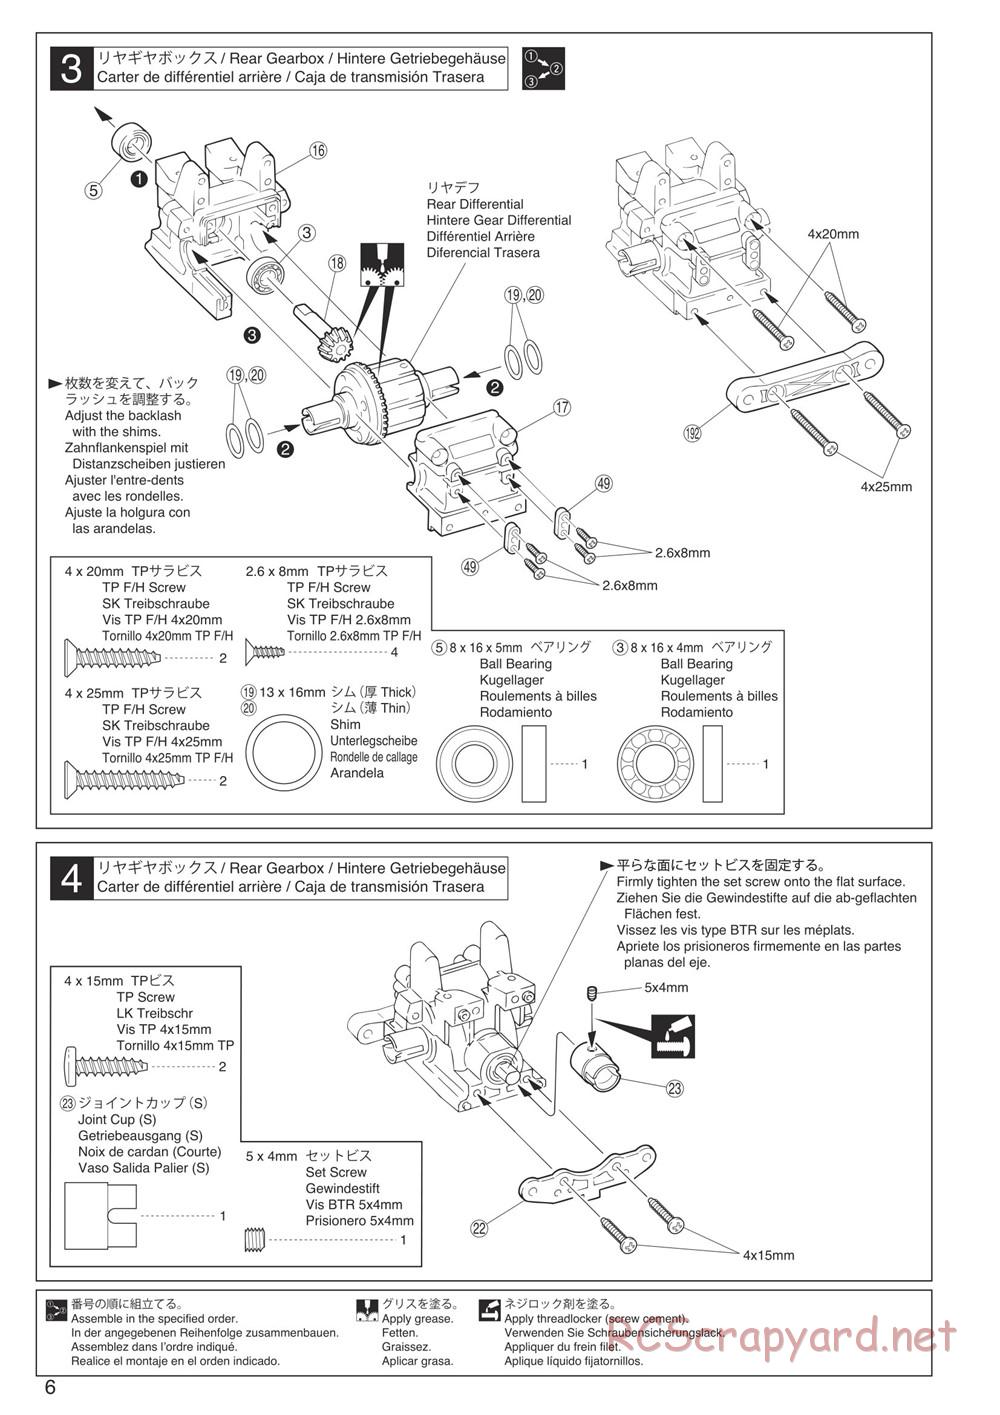 Kyosho - Inferno Neo - Manual - Page 6